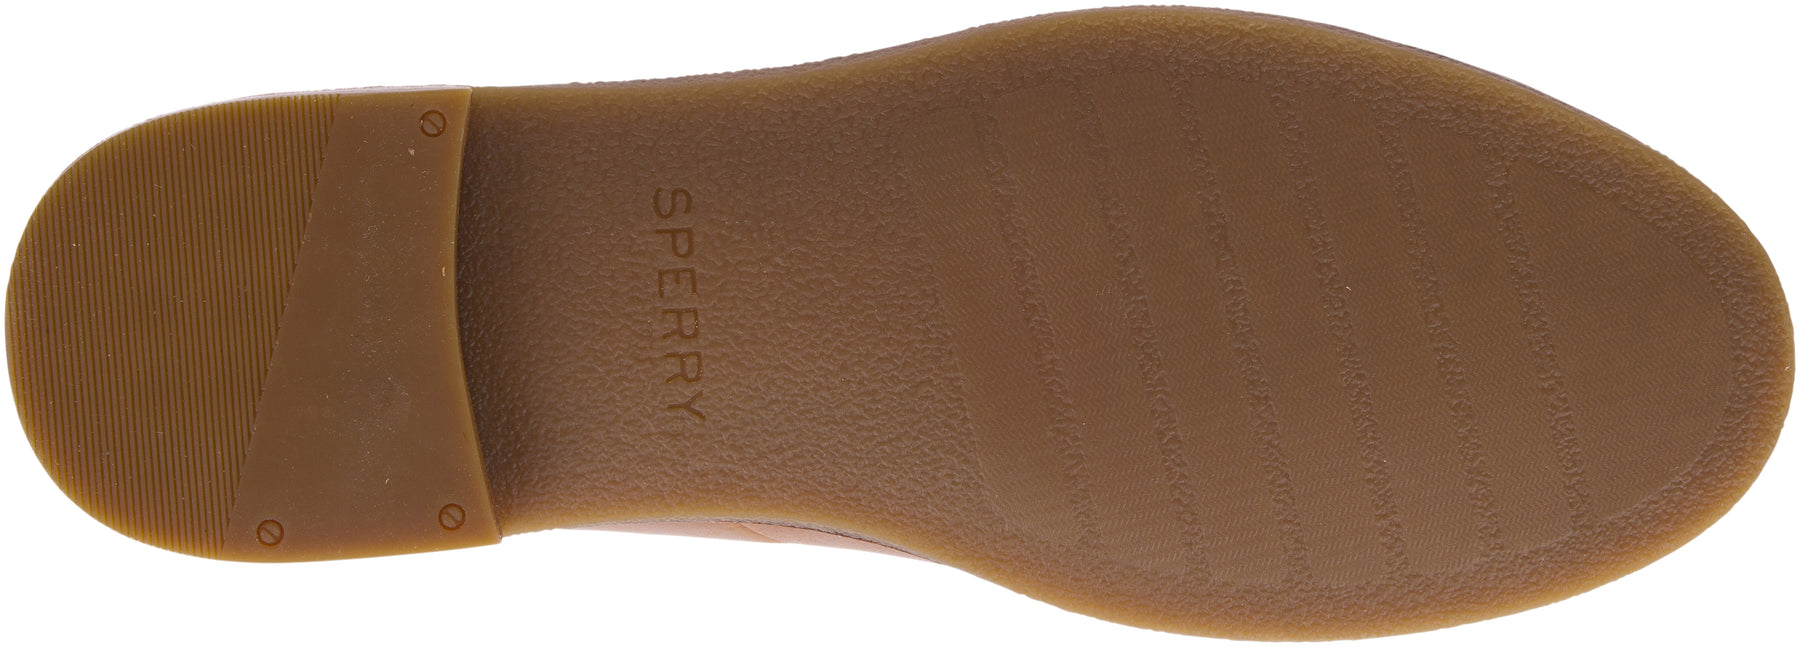 Women's Seaport Levy Tan Casual (STS82456)